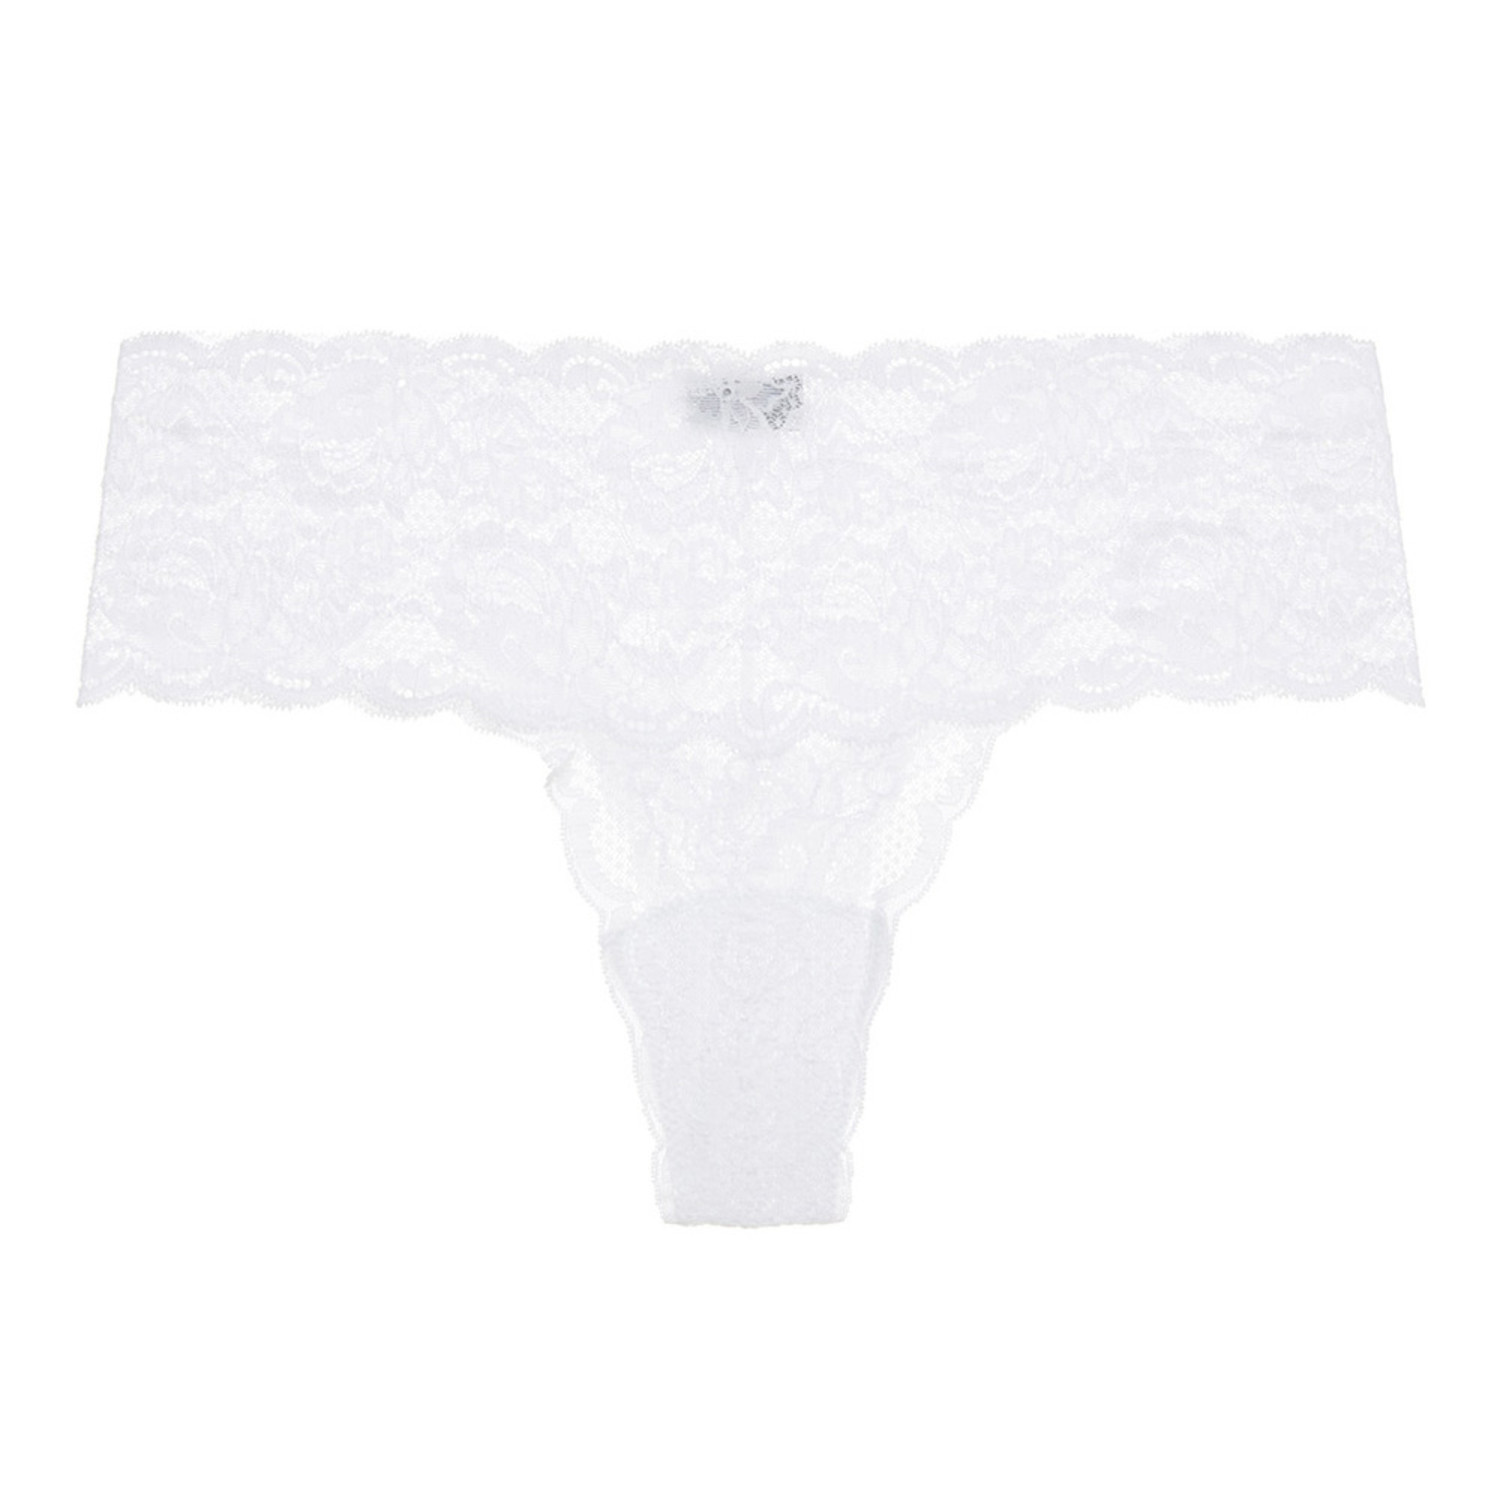 NSN Comfie Cutie Thong BASIC NEVER0343 - Lace & Day